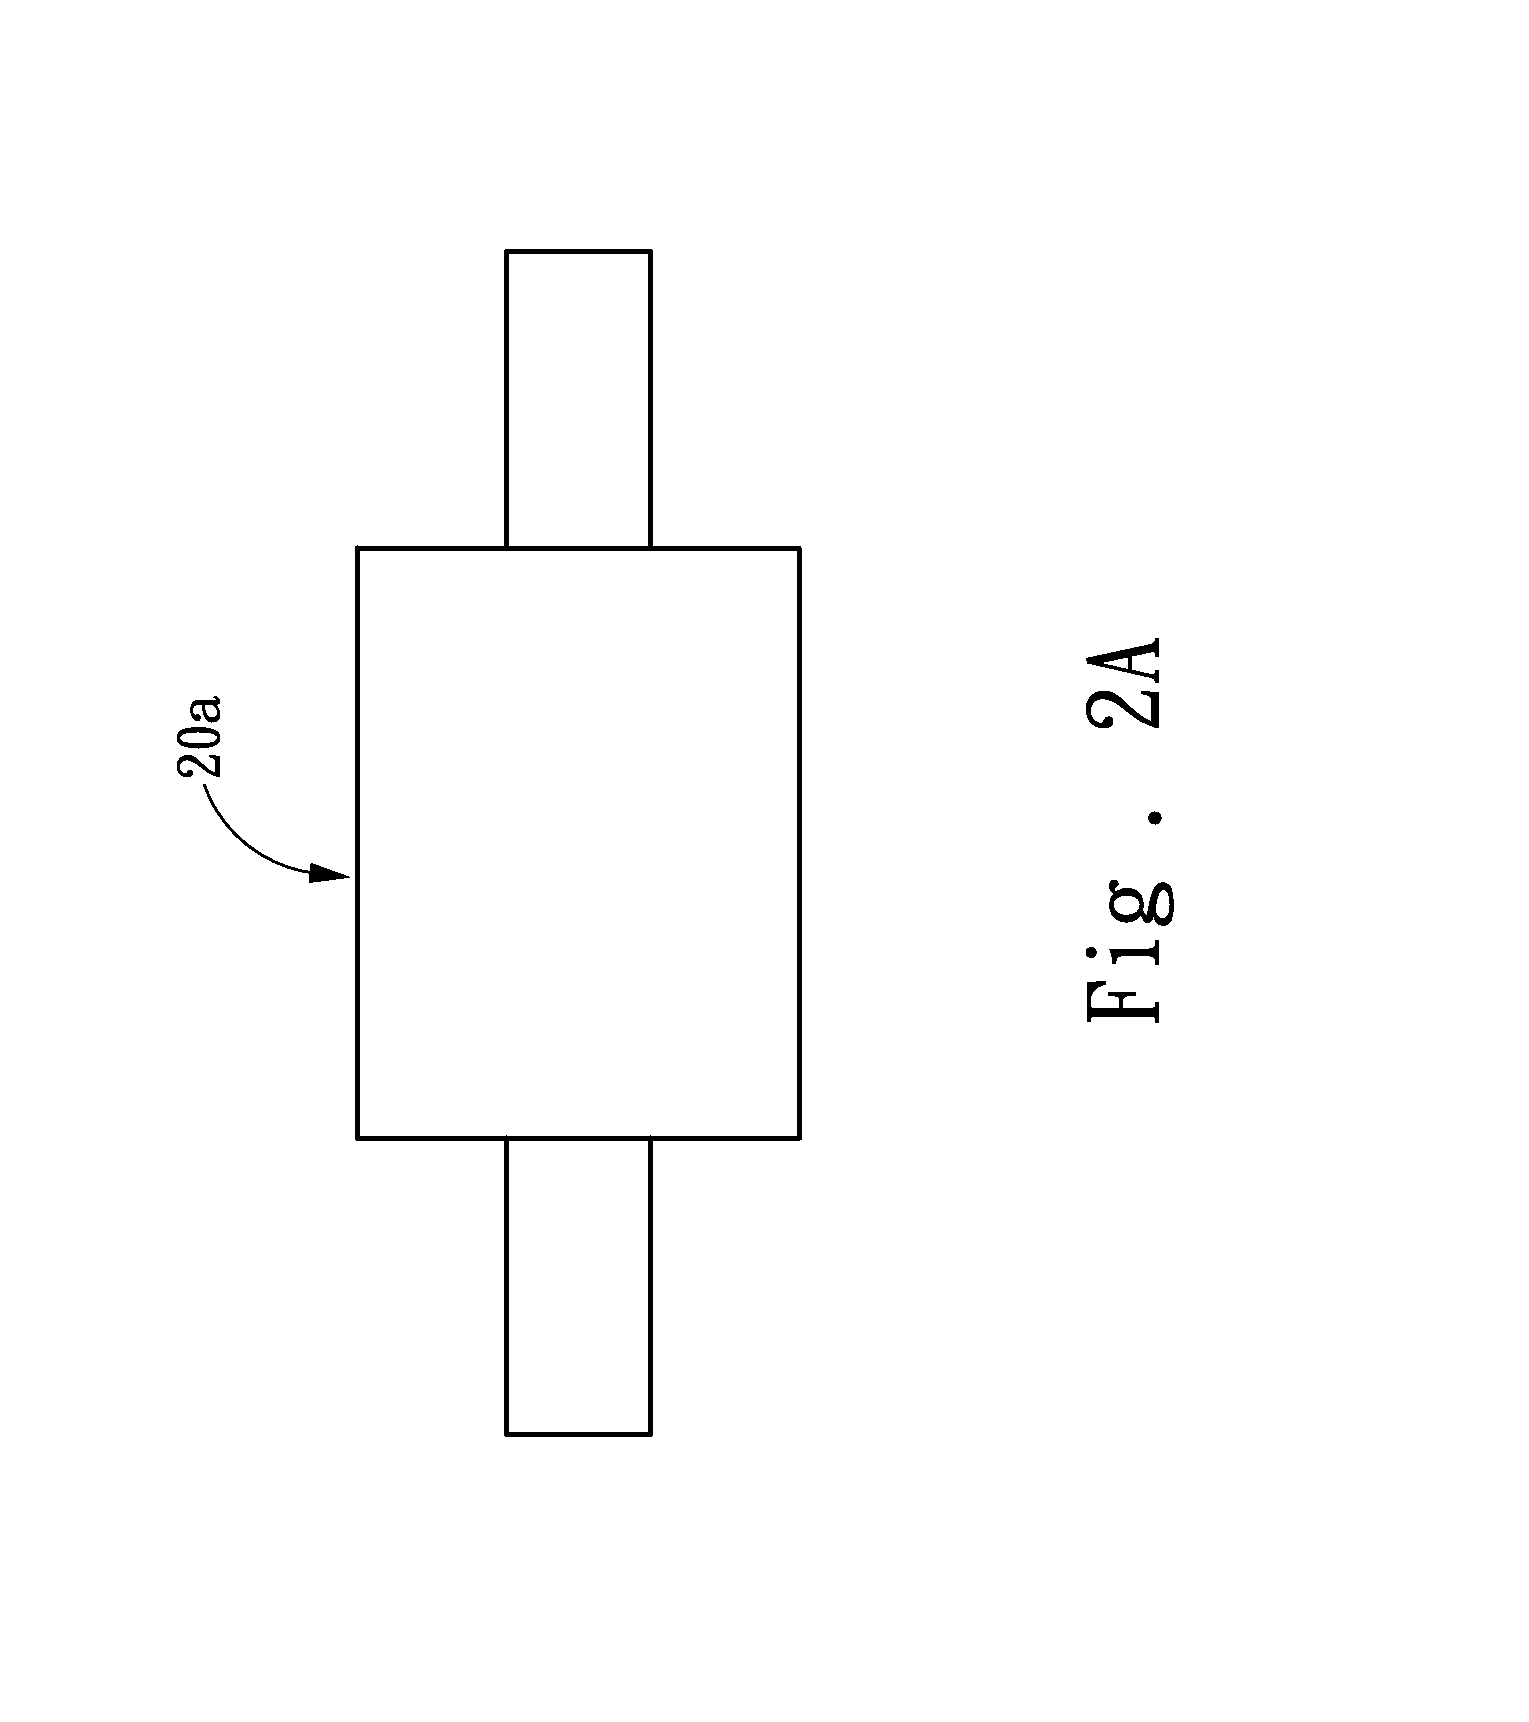 Method of using dual-port measurement system to measure acoustic impedance